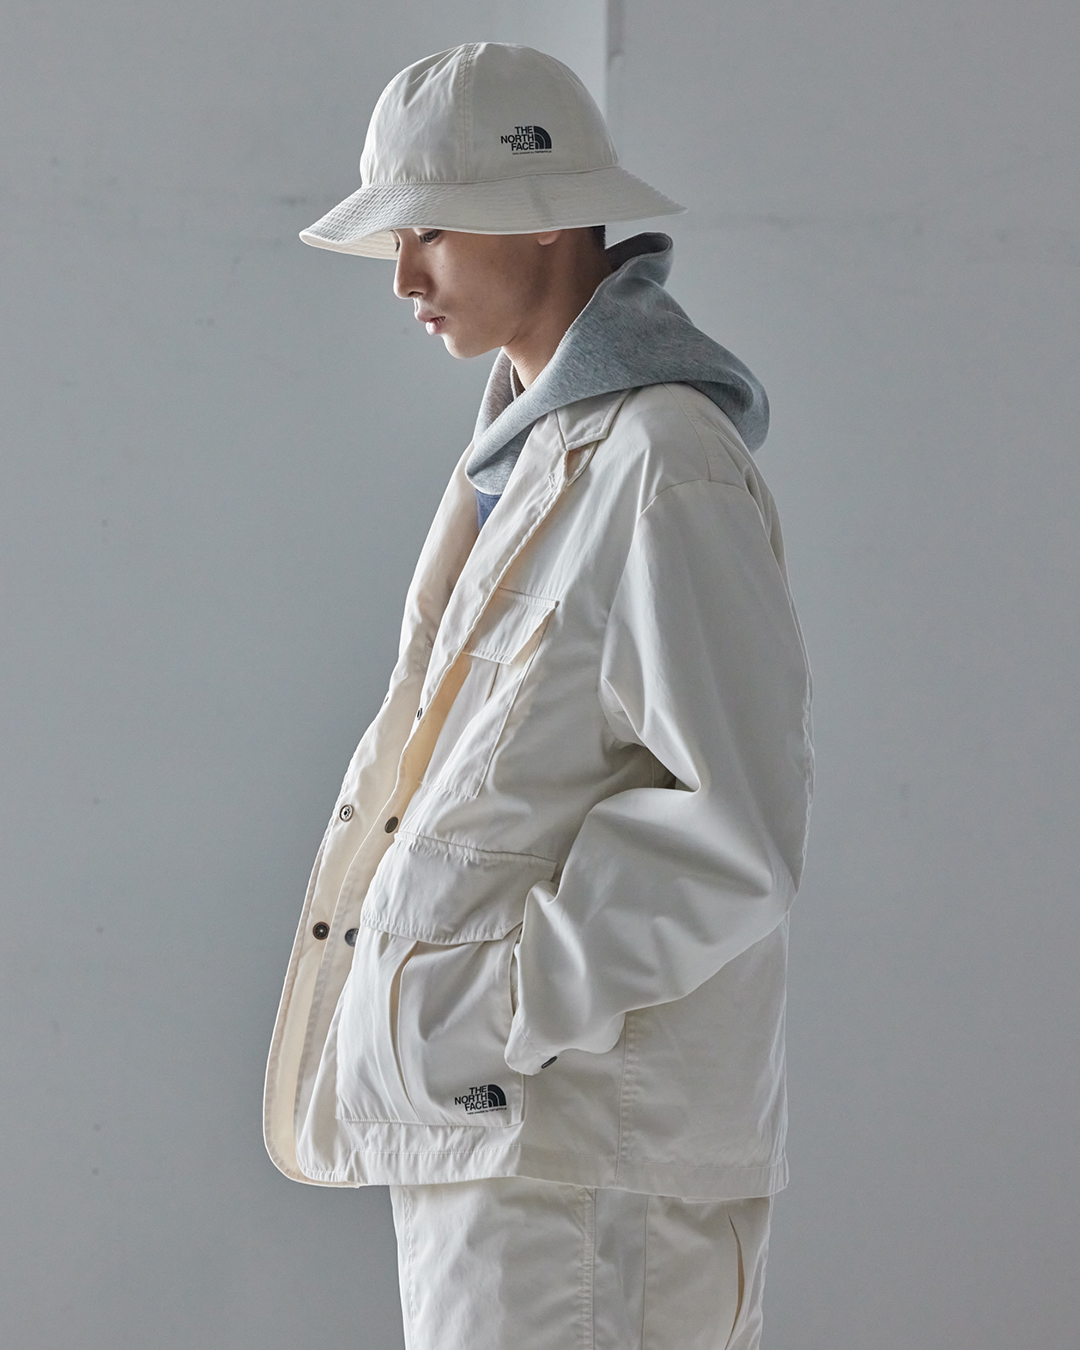 nanamica / nanamica launches a limited capsule collection of THE